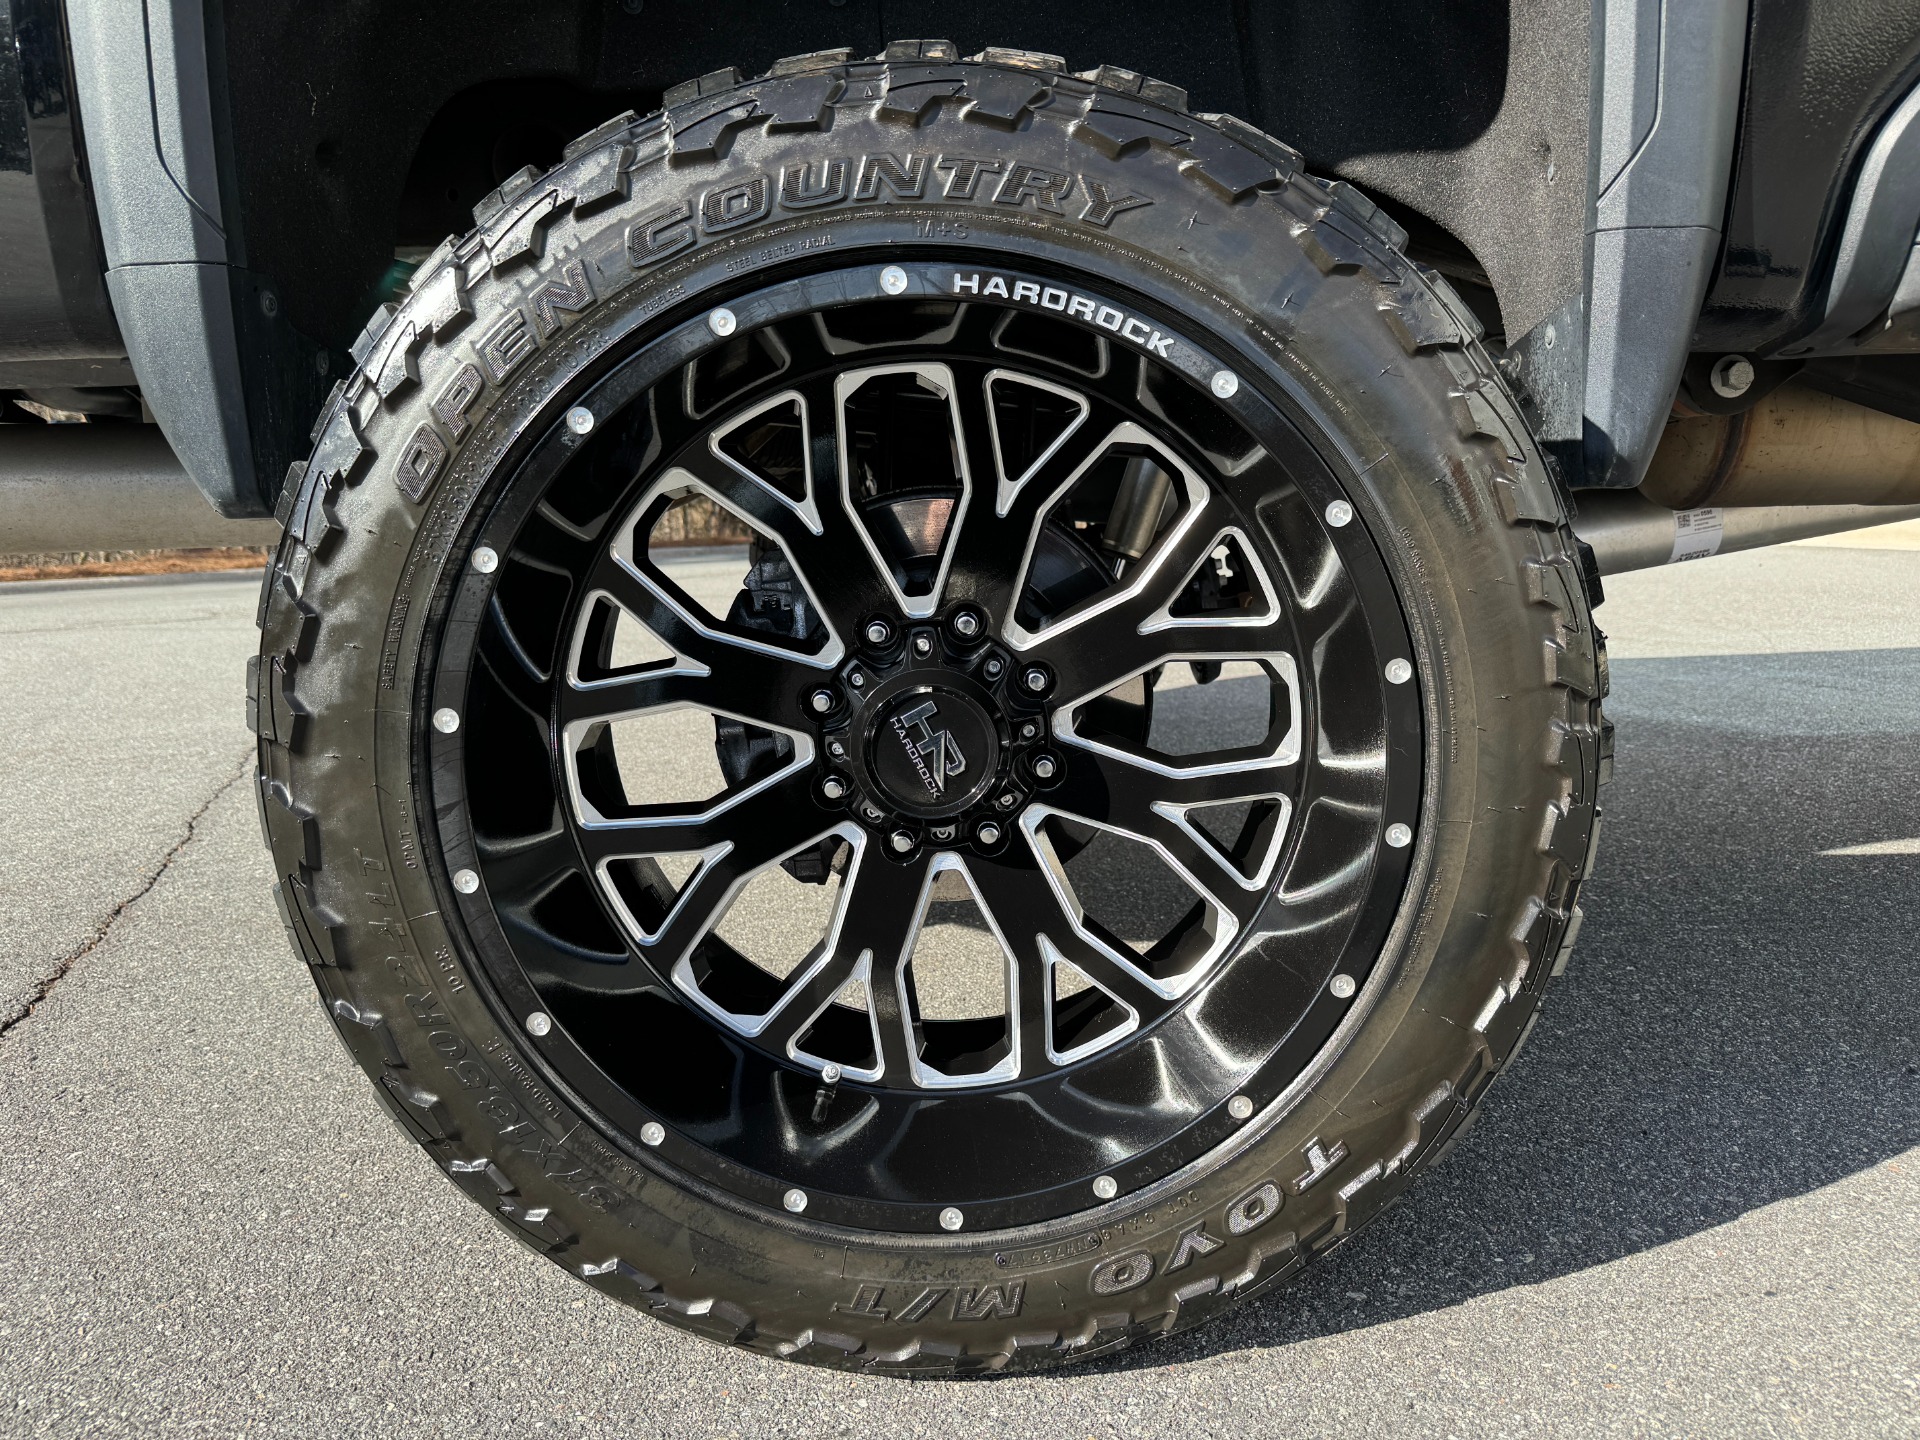 Used 2020 GMC Sierra 2500HD Denali Crew Cab LIFTED / HARDROCK WHEELS for sale $72,995 at Formula Imports in Charlotte NC 28227 40